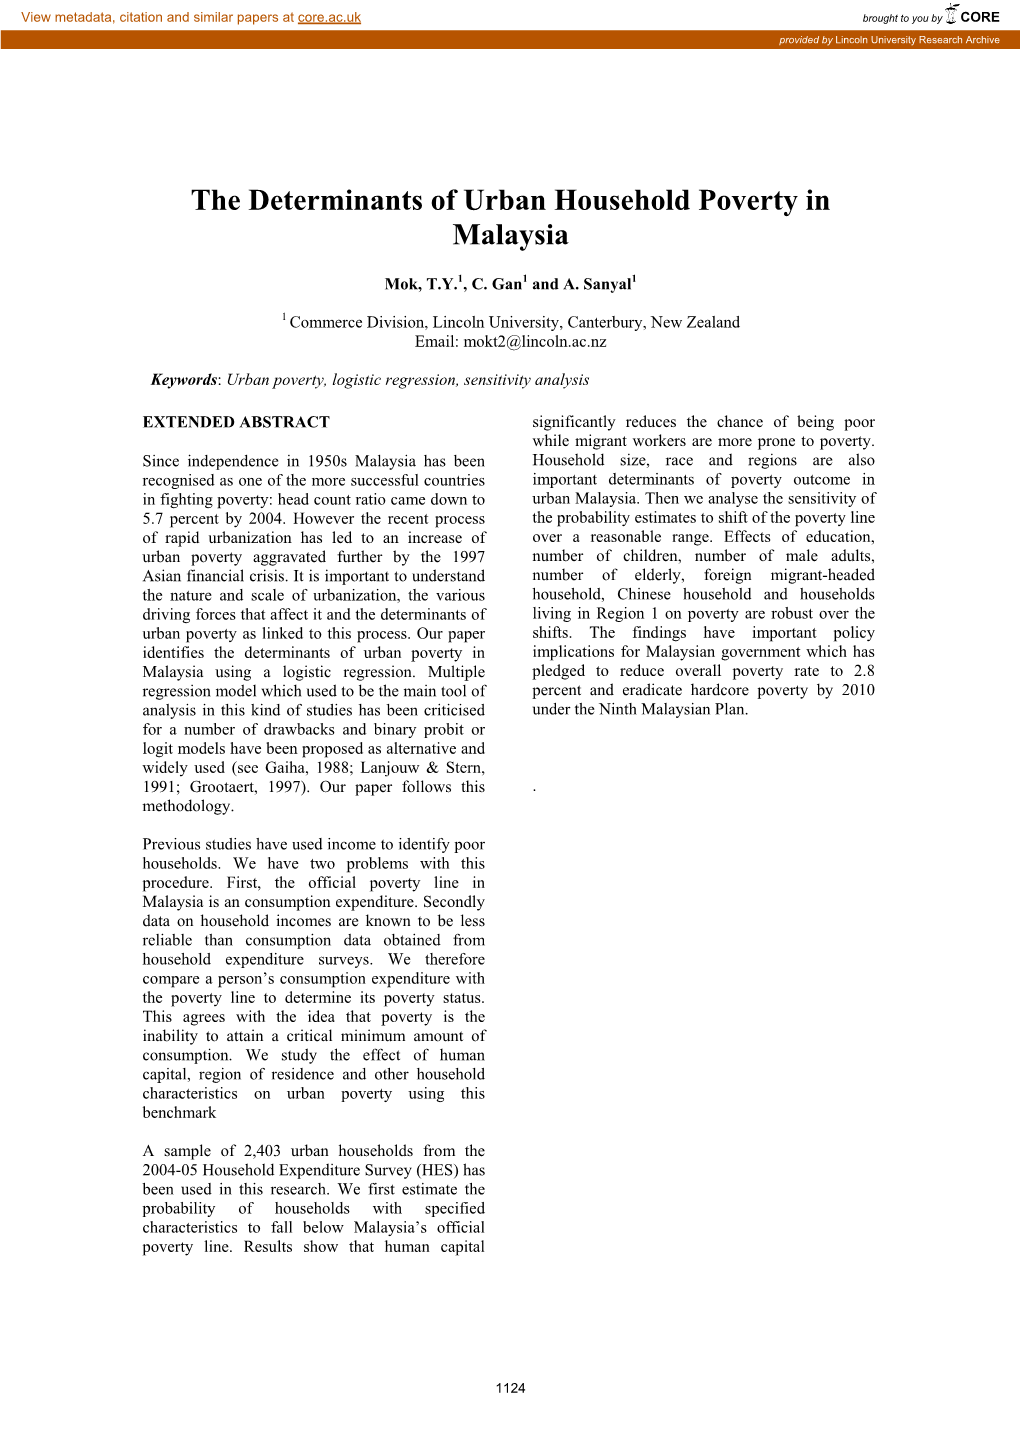 The Determinants of Urban Household Poverty in Malaysia